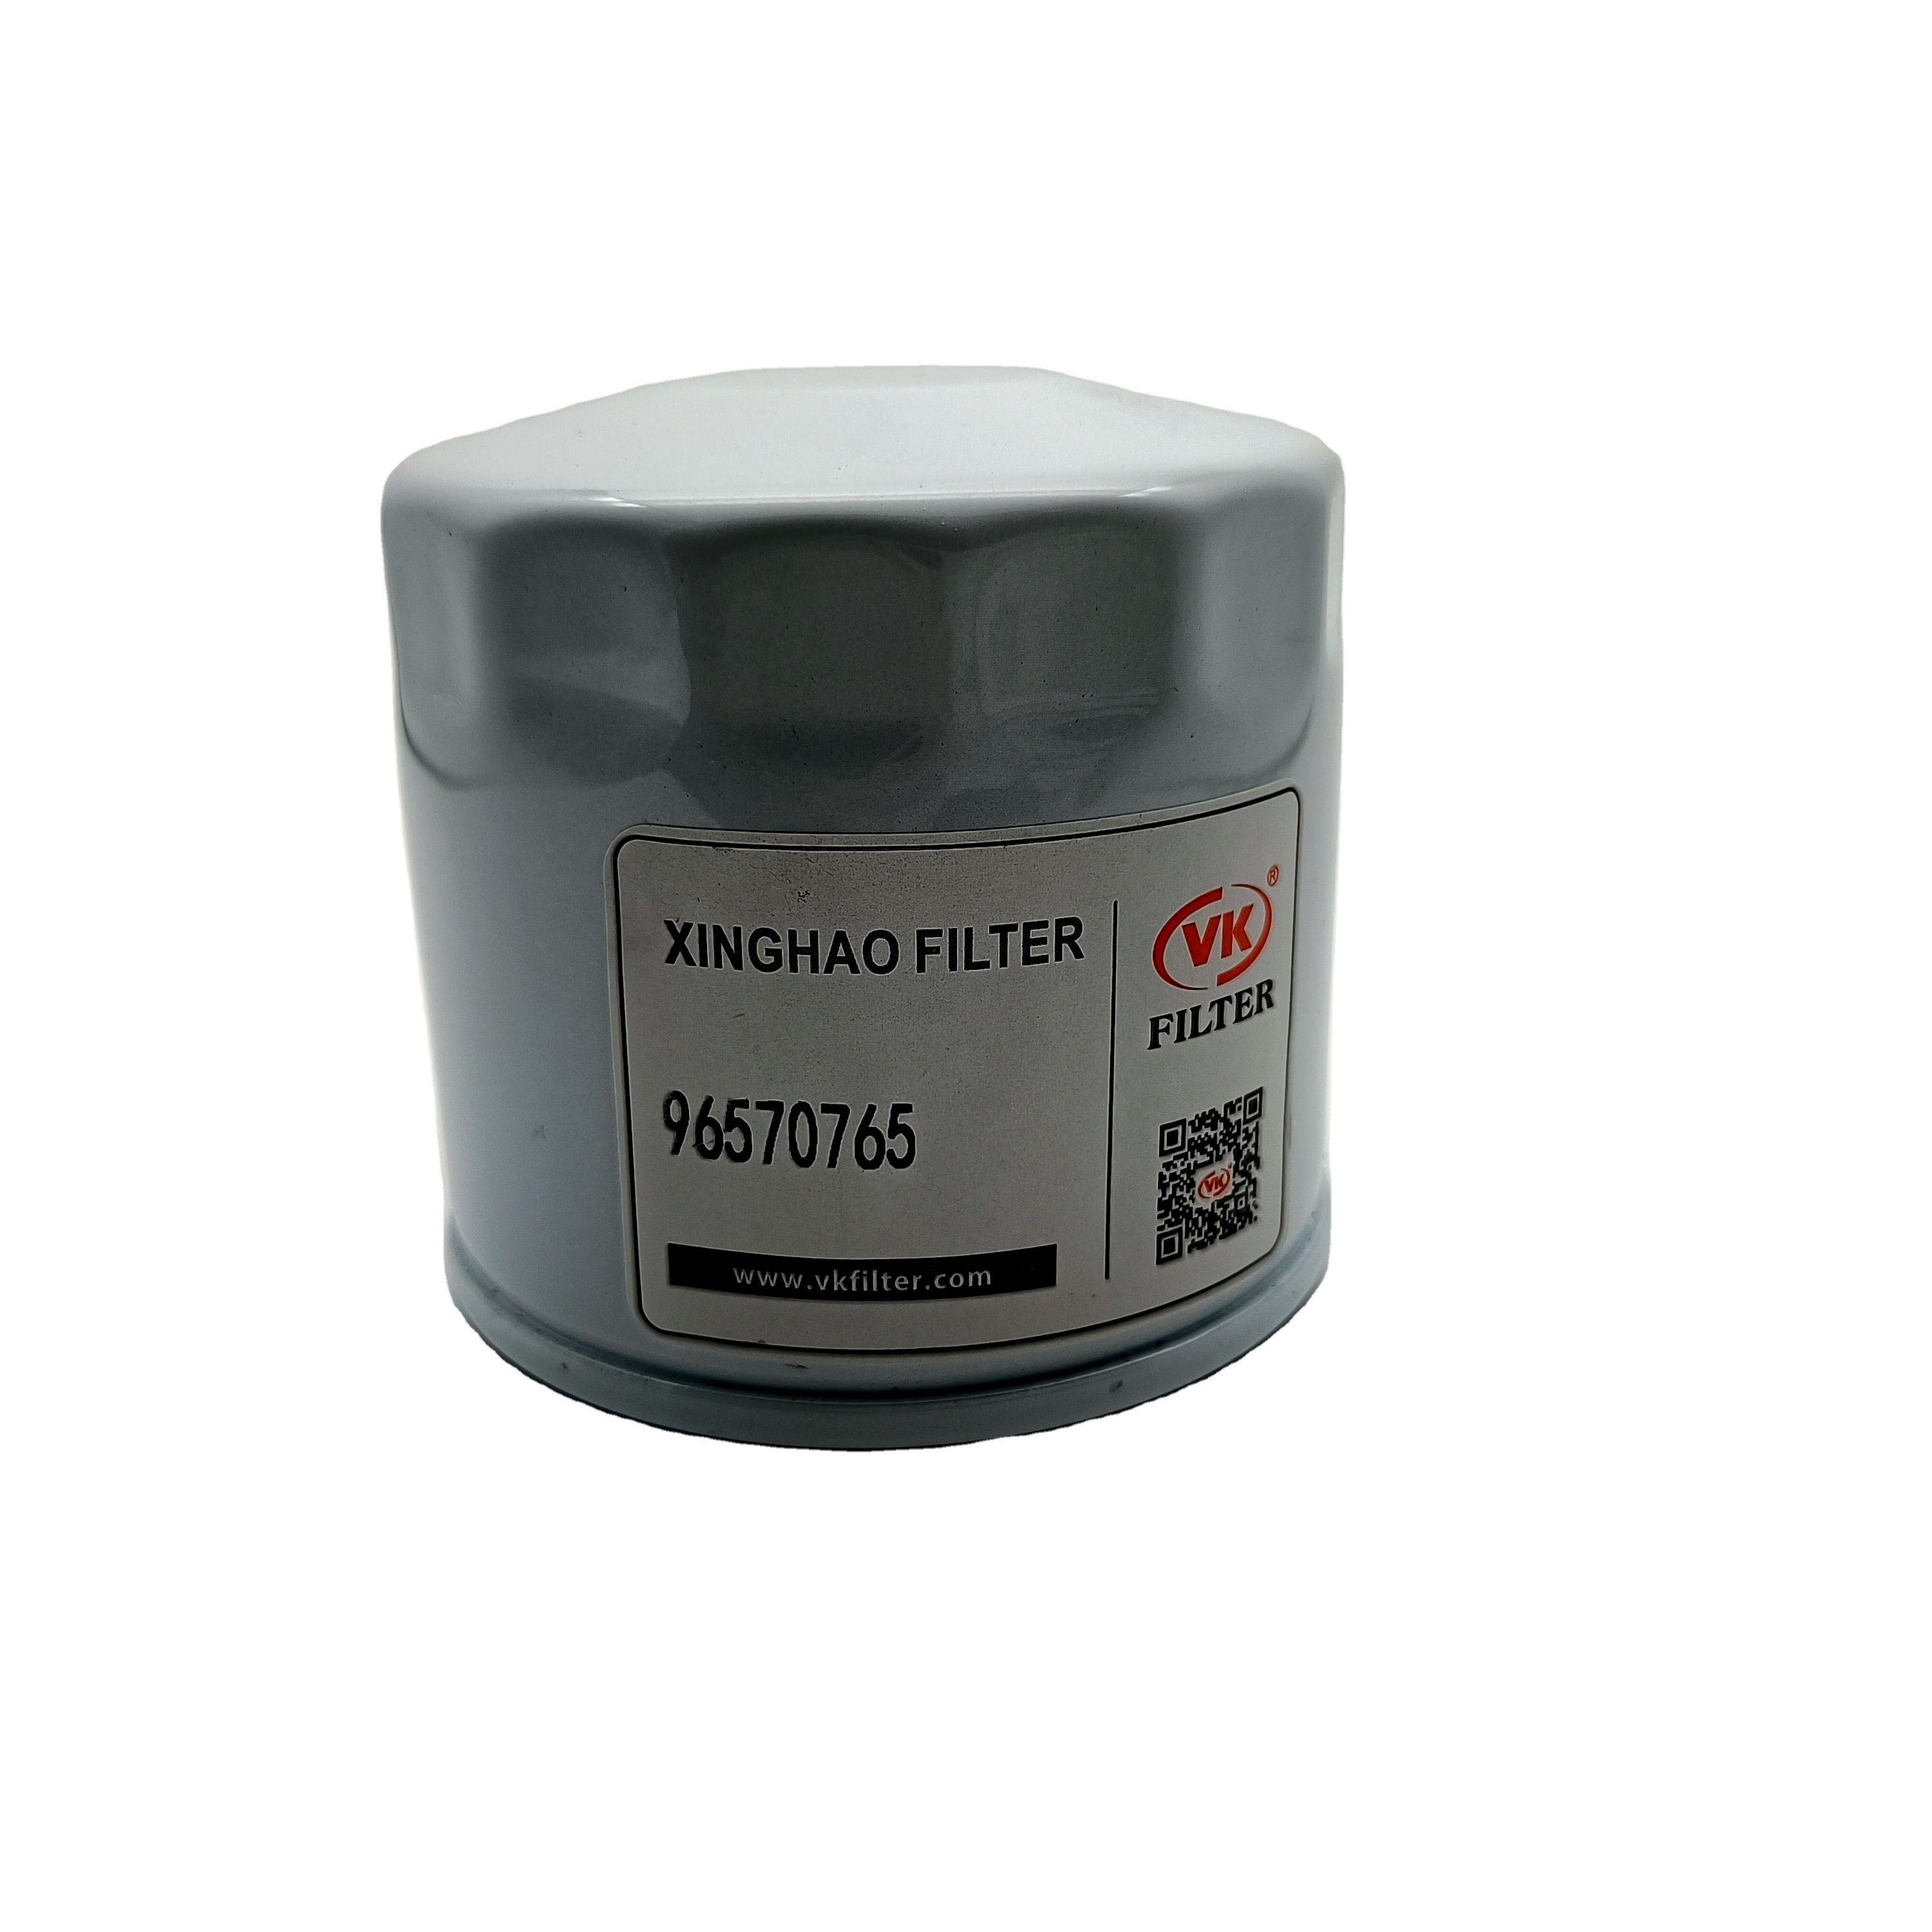 Construction Machinery Parts  Oil Filter 96570765 China Manufacturer